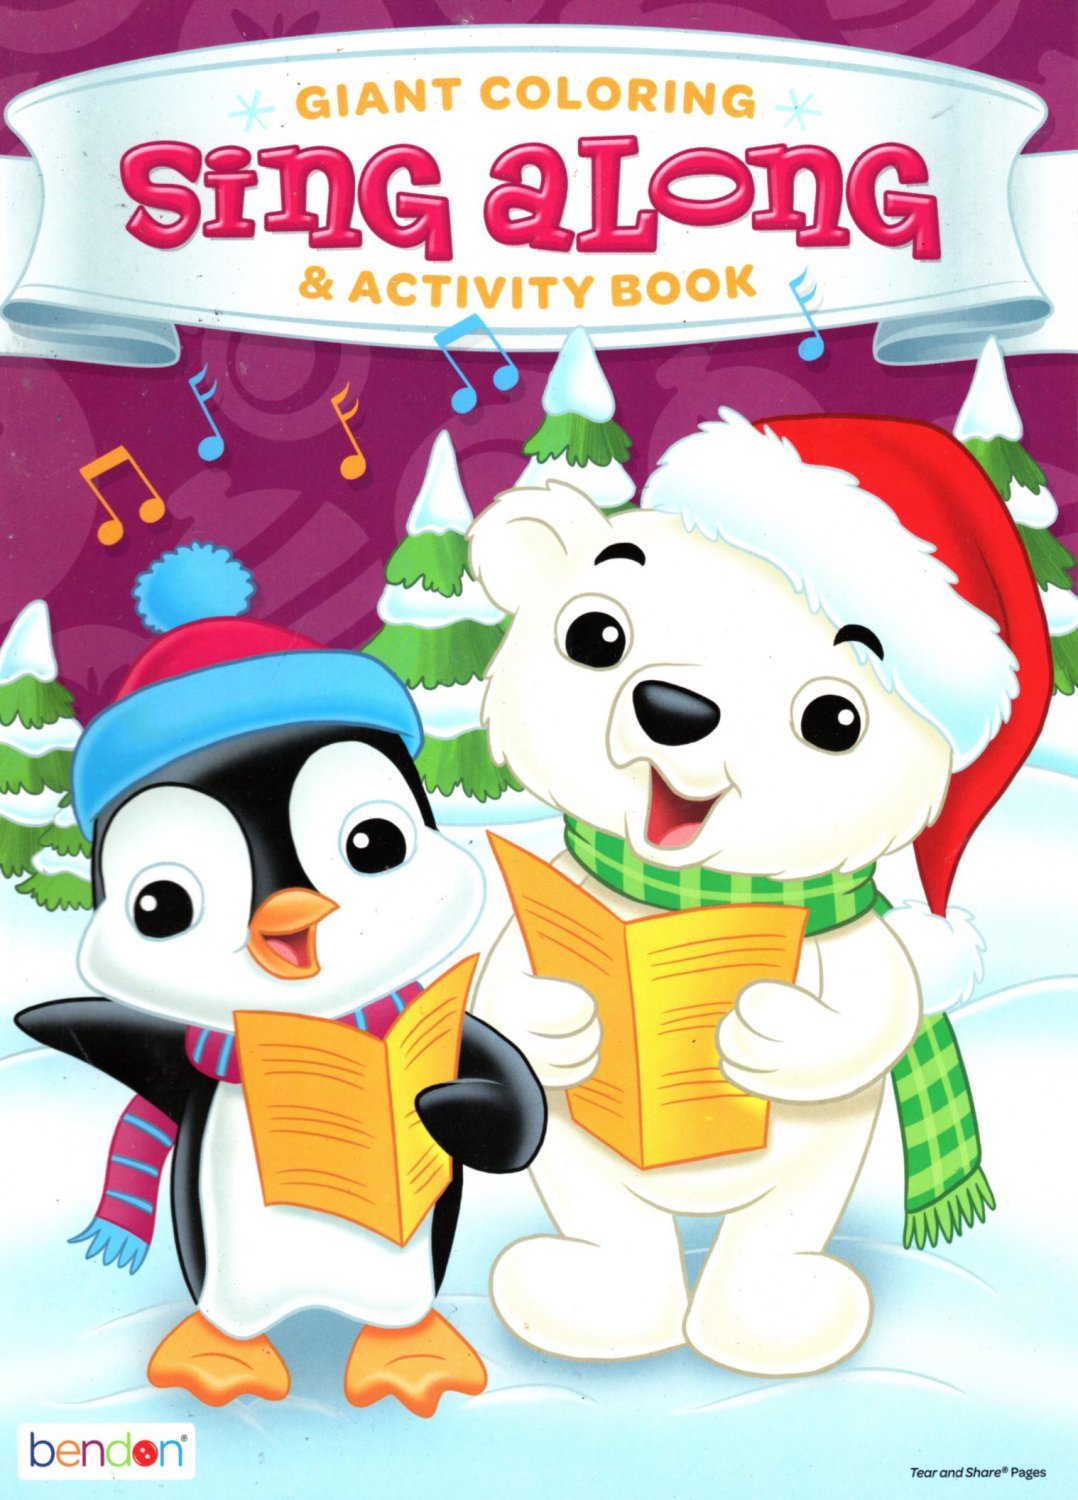 Christmas Edition Holiday - Giant Coloring and Activity Book - Sing Along